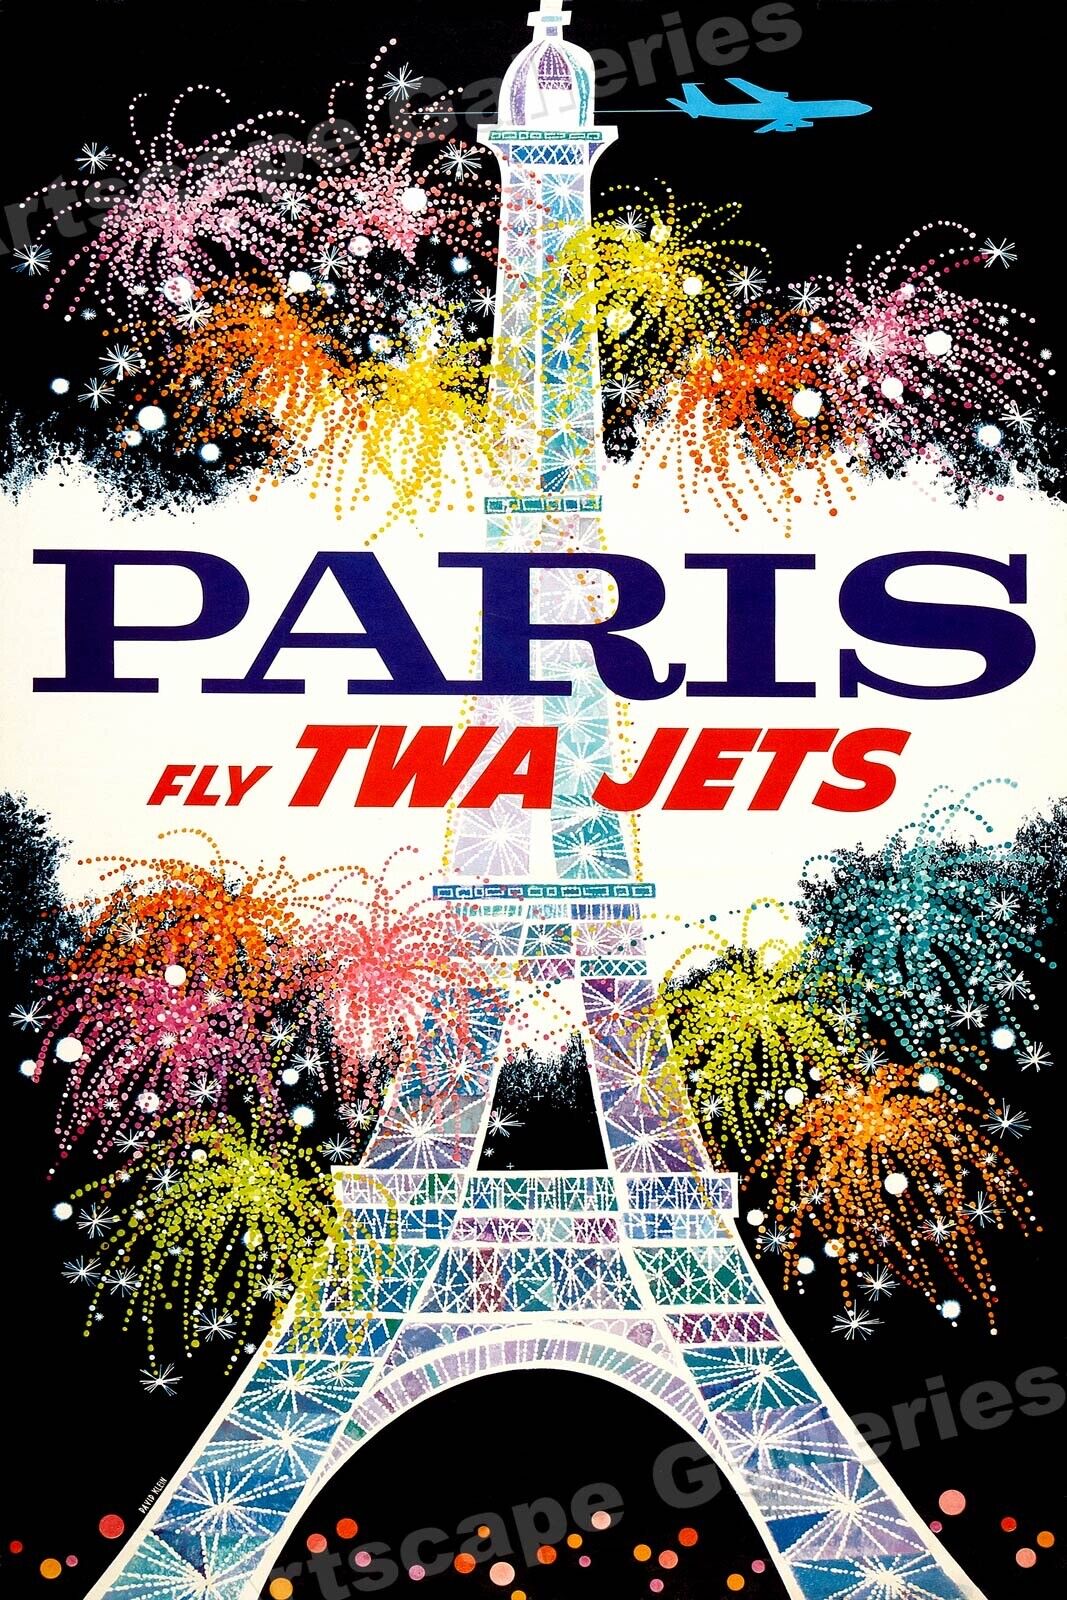 1962 Paris Fly TWA Jets Eiffel Tower Vintage Style France Travel Poster - 16x24